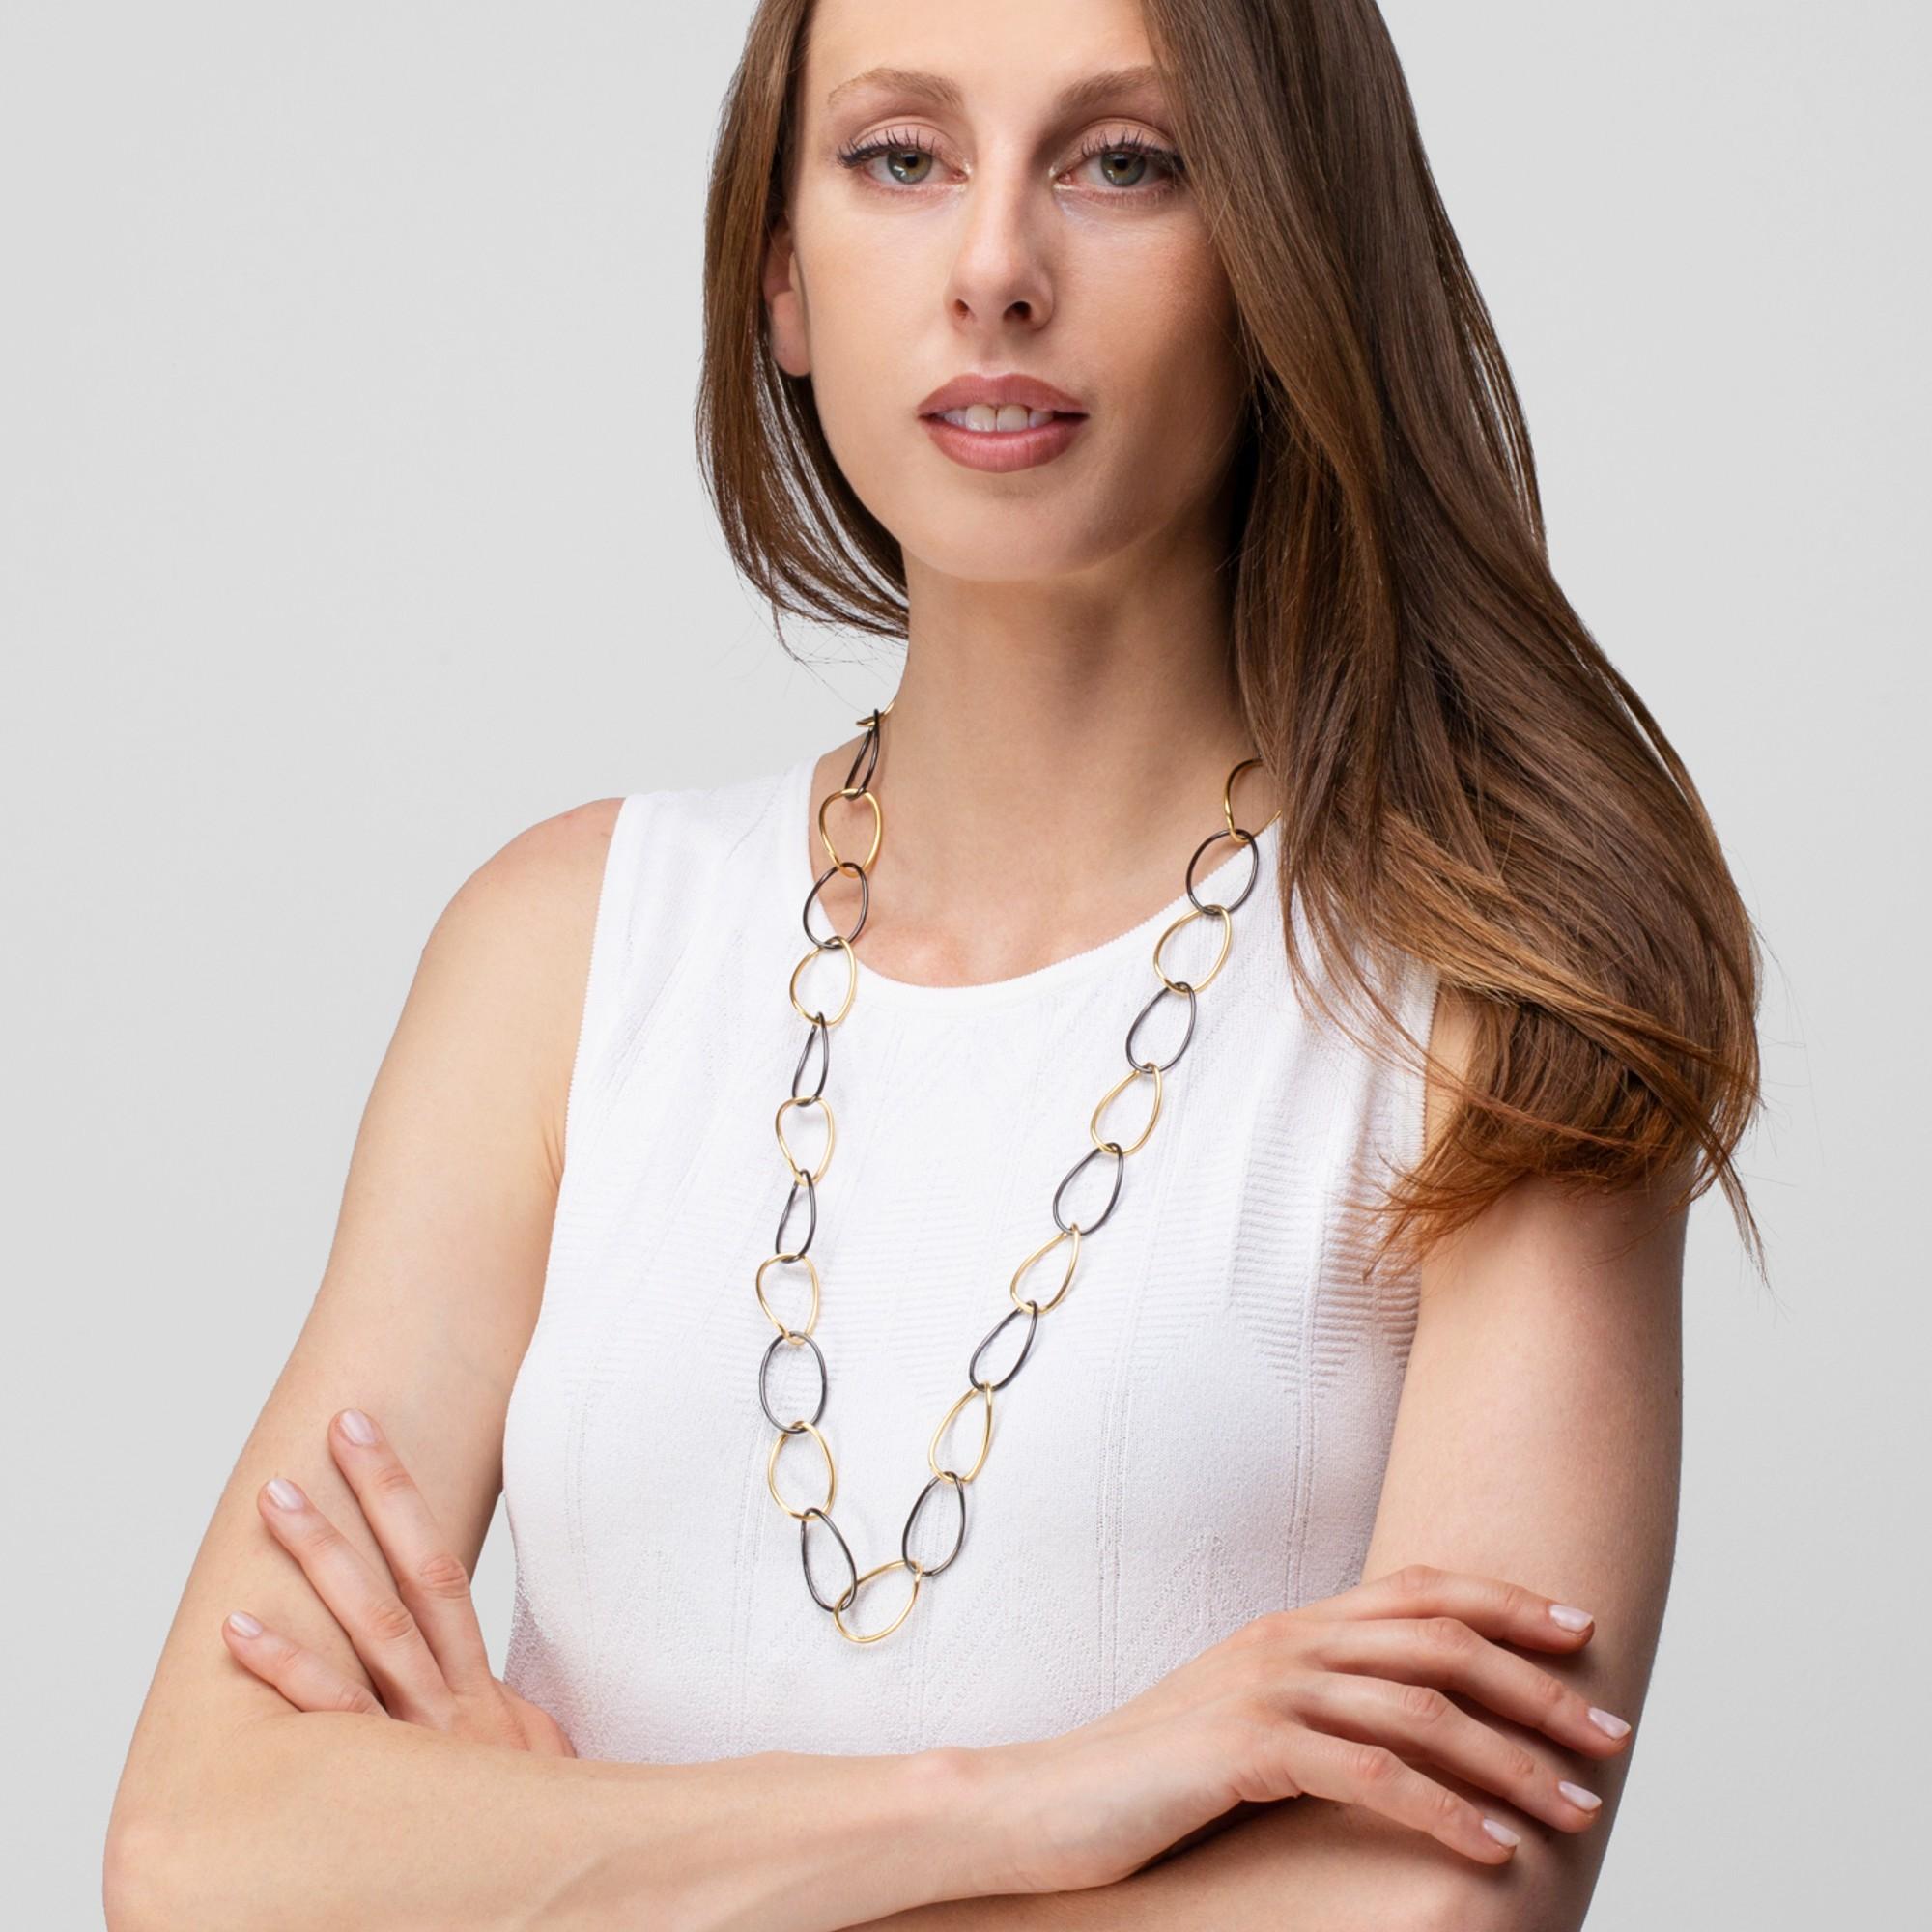 Alex Jona design collection, hand crafted in Italy, alternating 18k yellow gold and black high-tech ceramic 80 cm long curb-link necklace. With a hardness approaching that of diamond, high-tech ceramic is a highly scratch-resistant material. Light